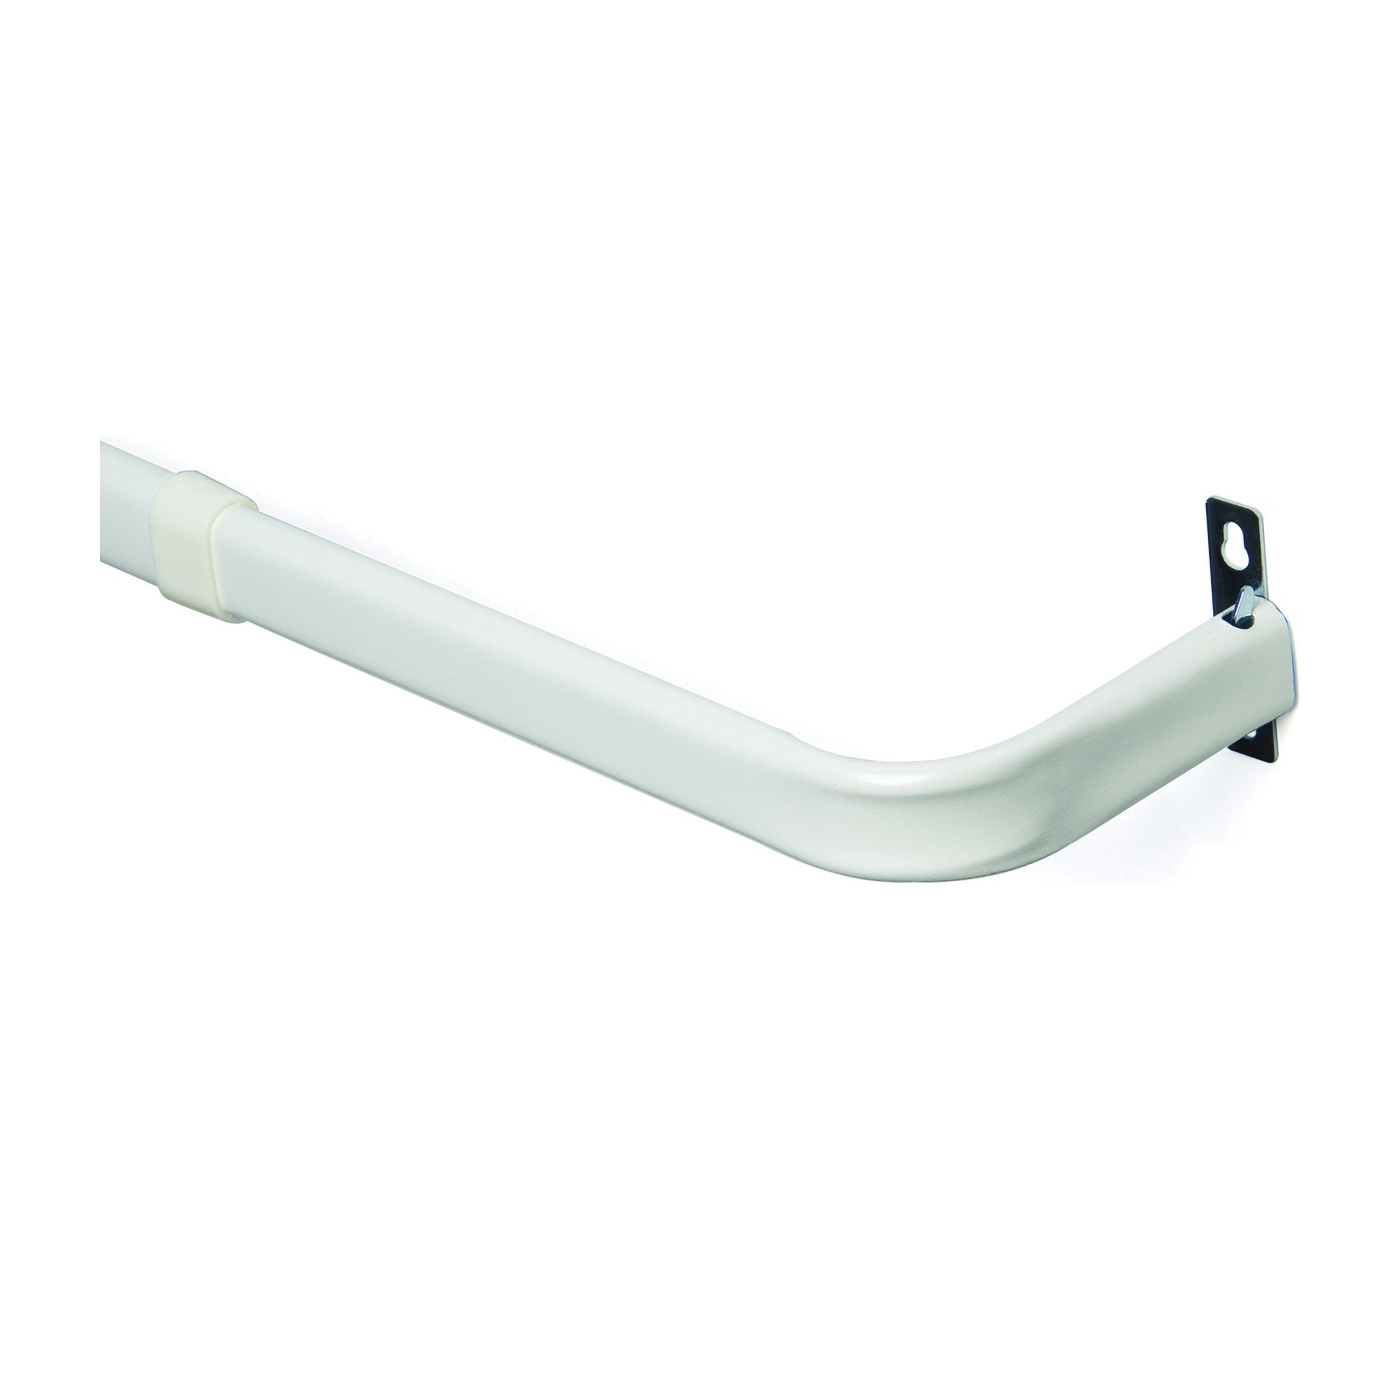 KN527 Curtain Rod, 1 in Dia, 48 to 86 in L, Steel, White